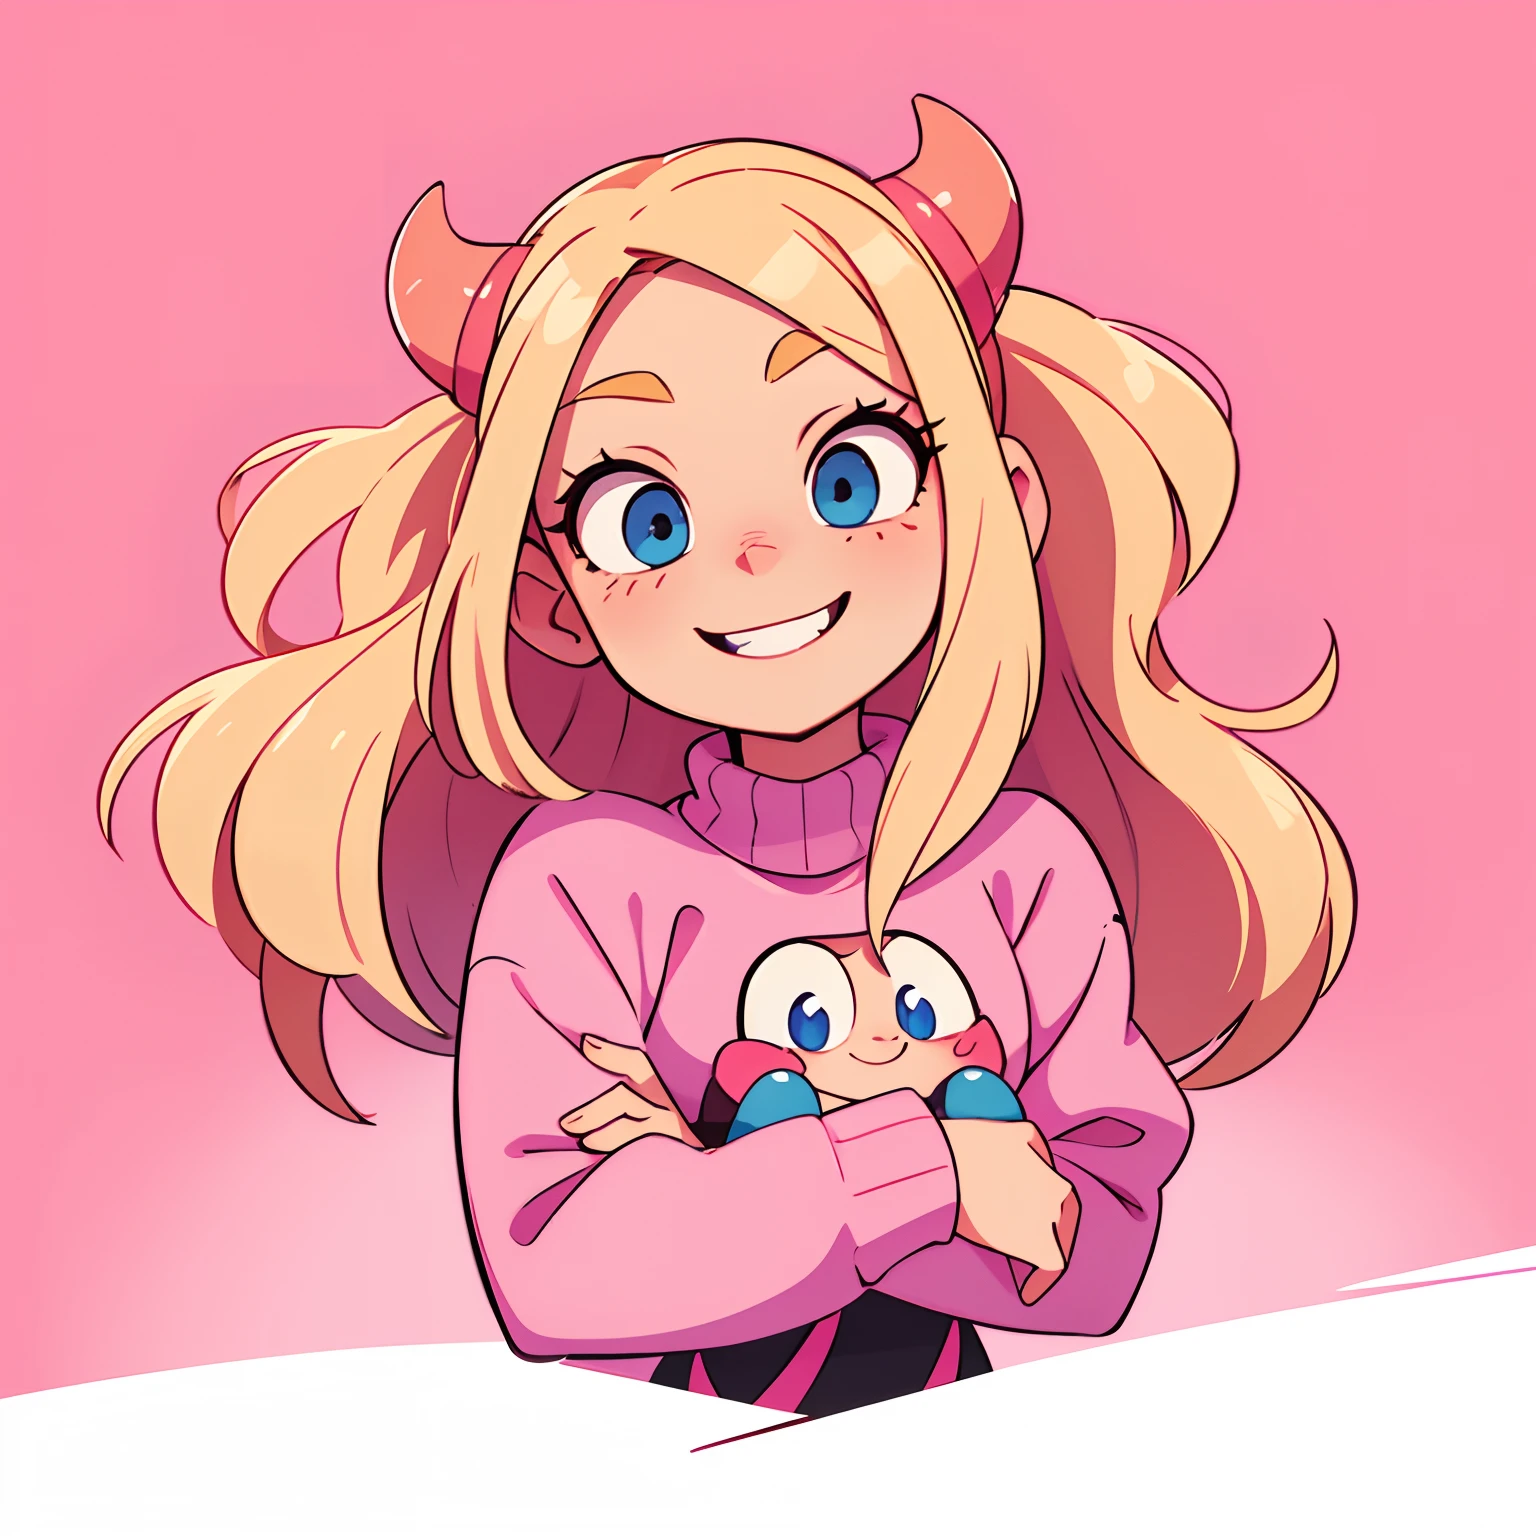 cartoon woman cute twitch emote, long blonde hair, pink highlights, blue eyes, pink oversized sweater over the shoulders, red horns with a mischievous smile